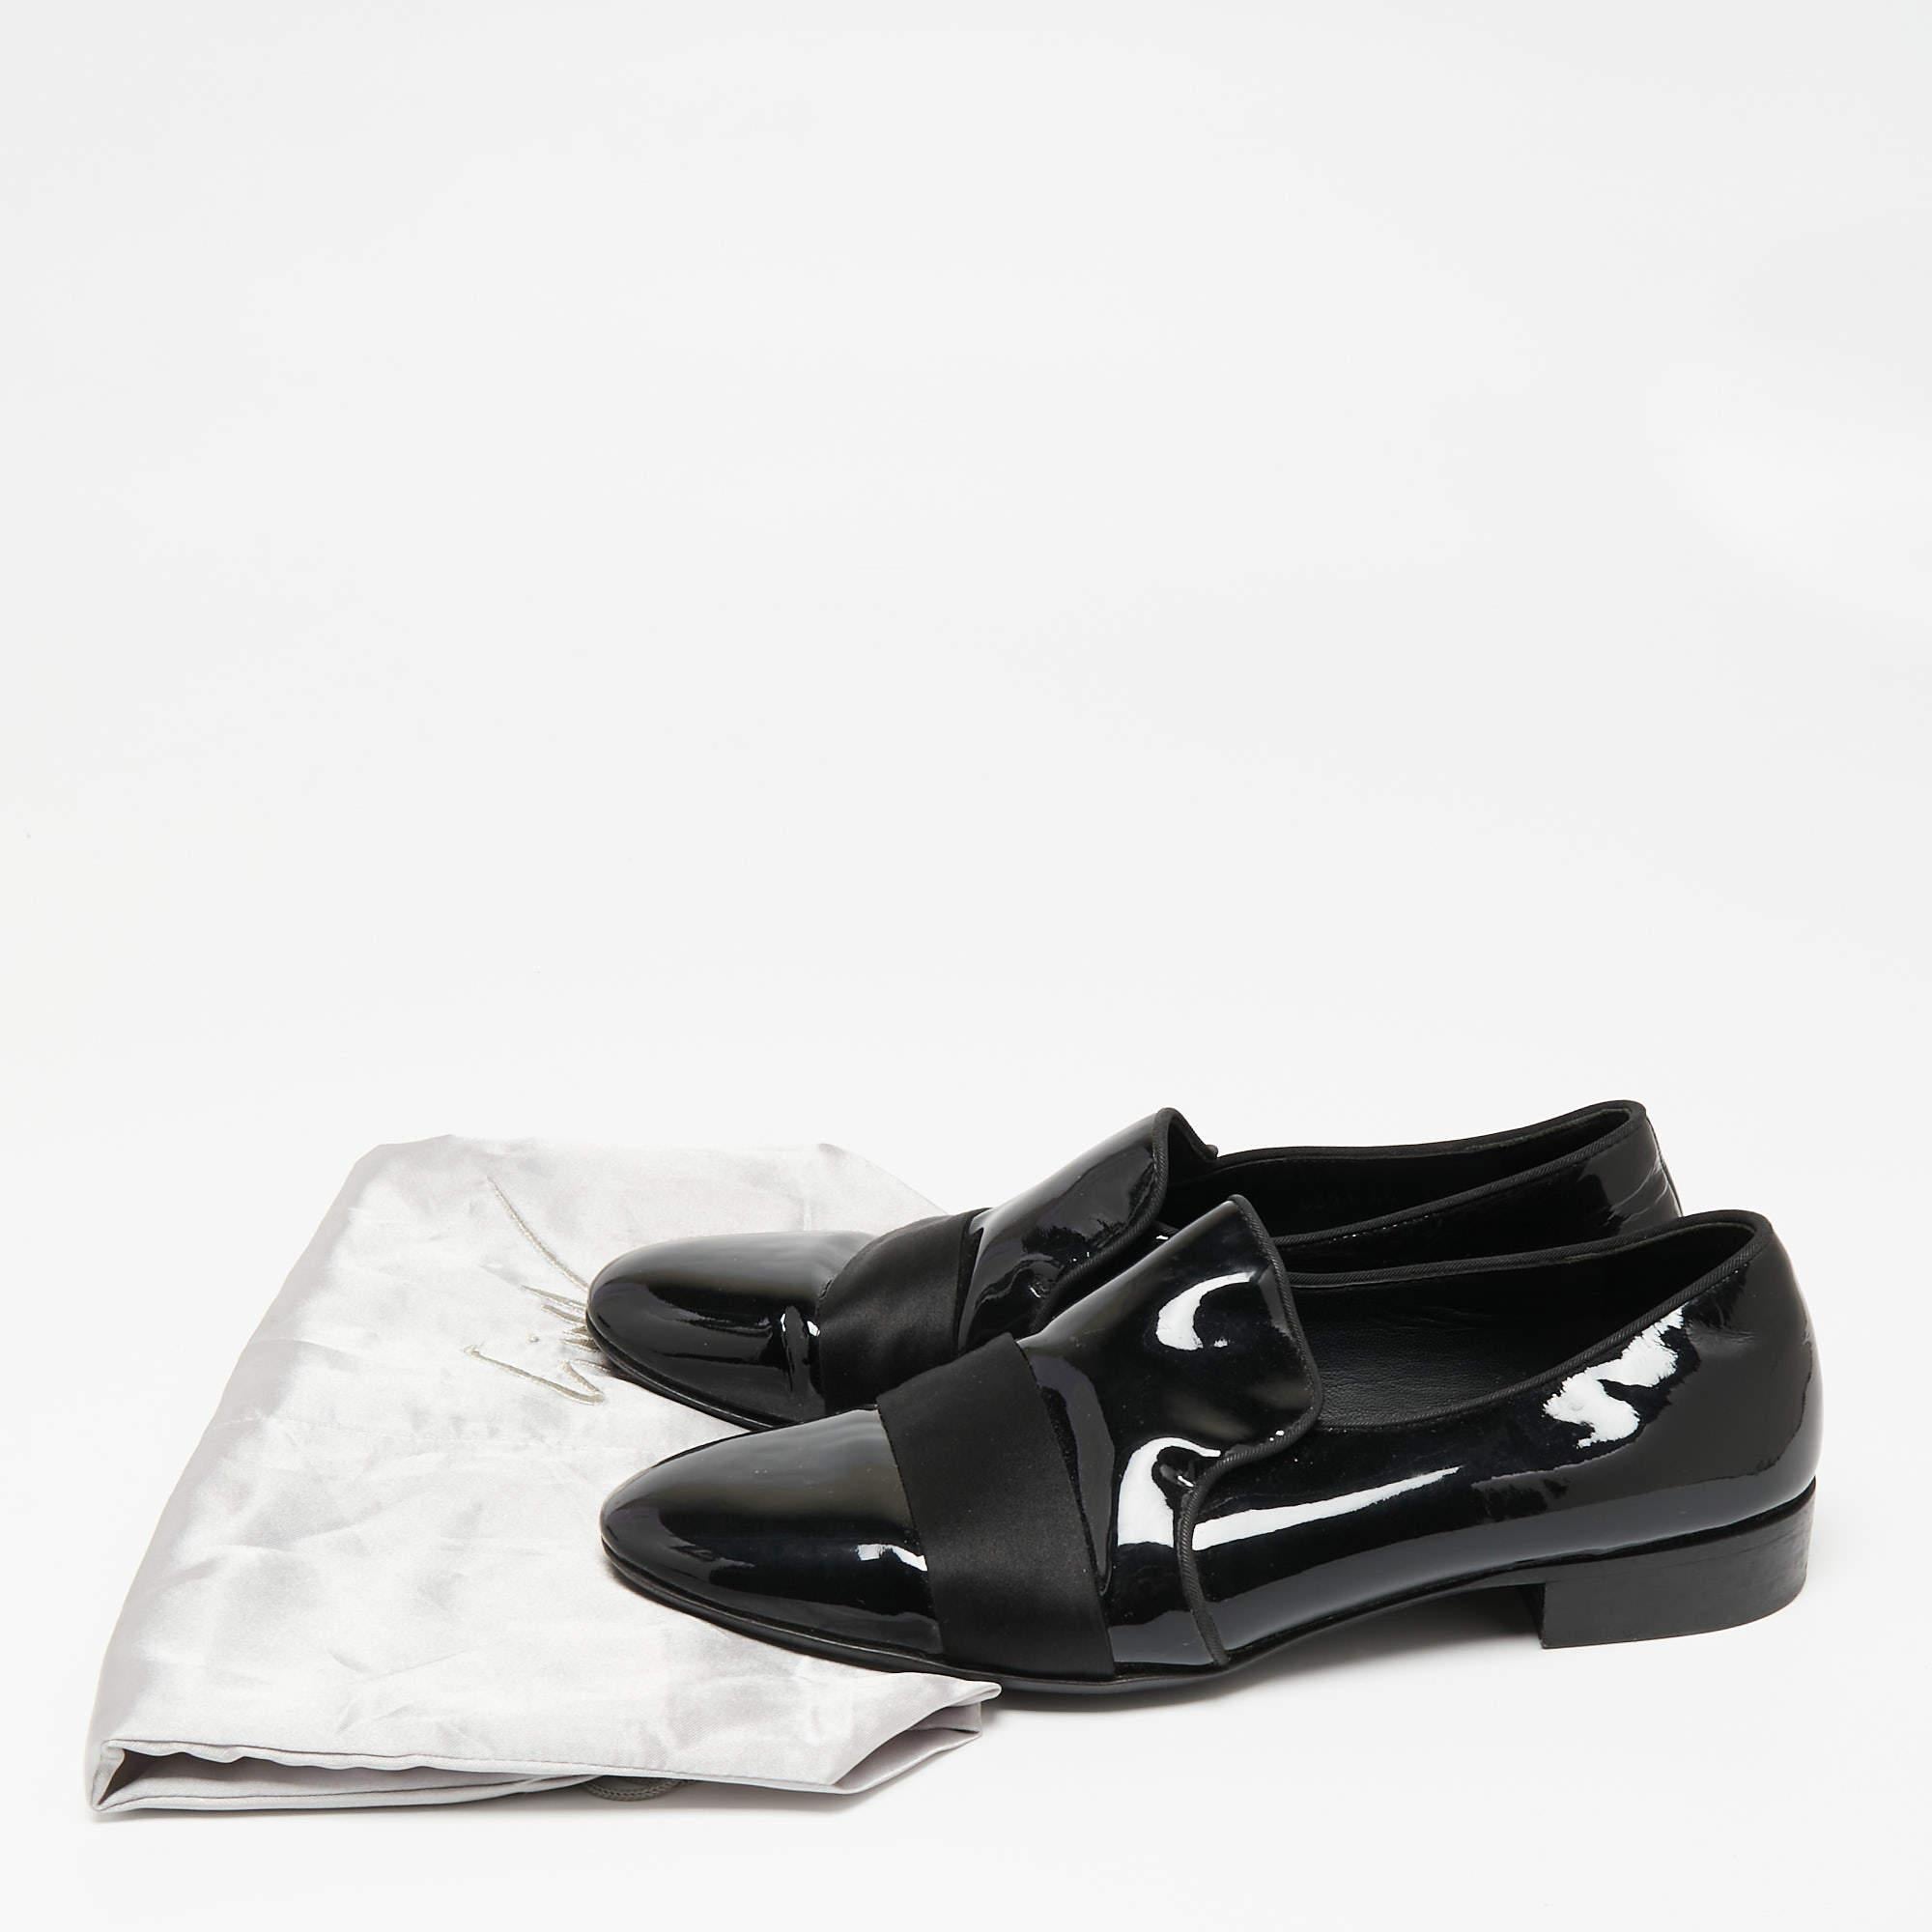 Giuseppe Zanotti Black Patent Leather and Satin Cap Toe Smoking Slippers Size 40 For Sale 4